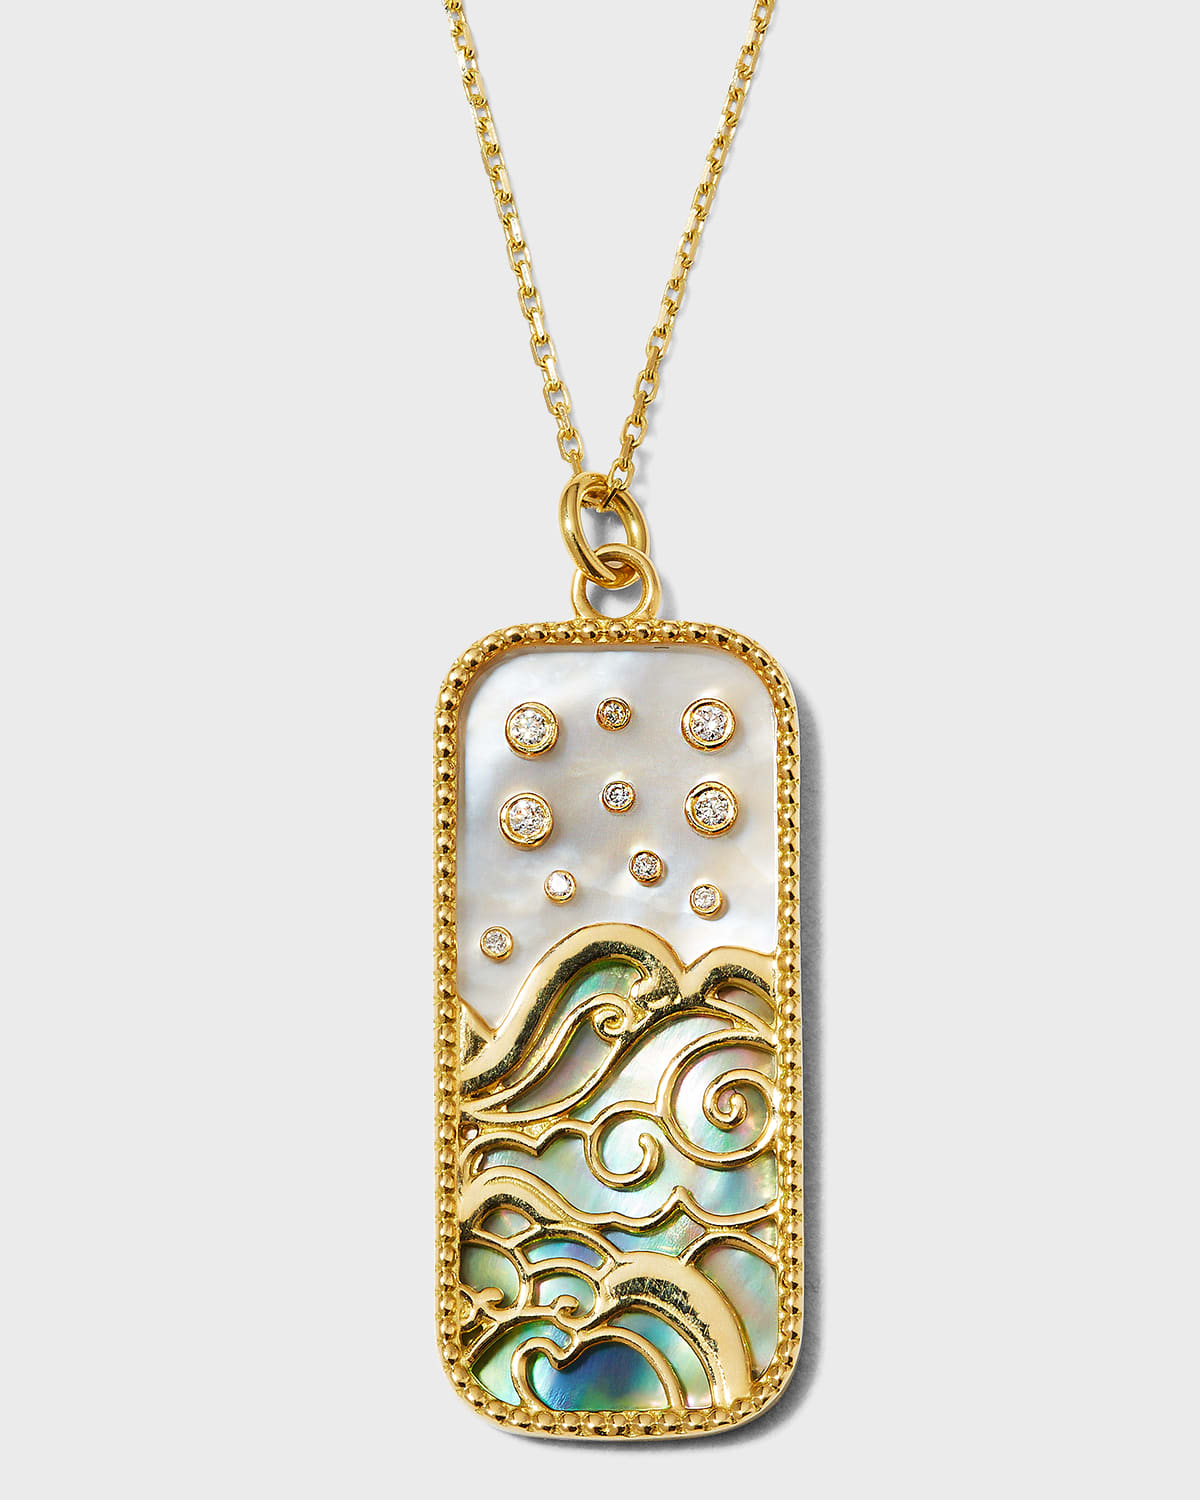 L'atelier Nawbar Yellow Gold Elements of Love Necklace in Mother-of-Pearl